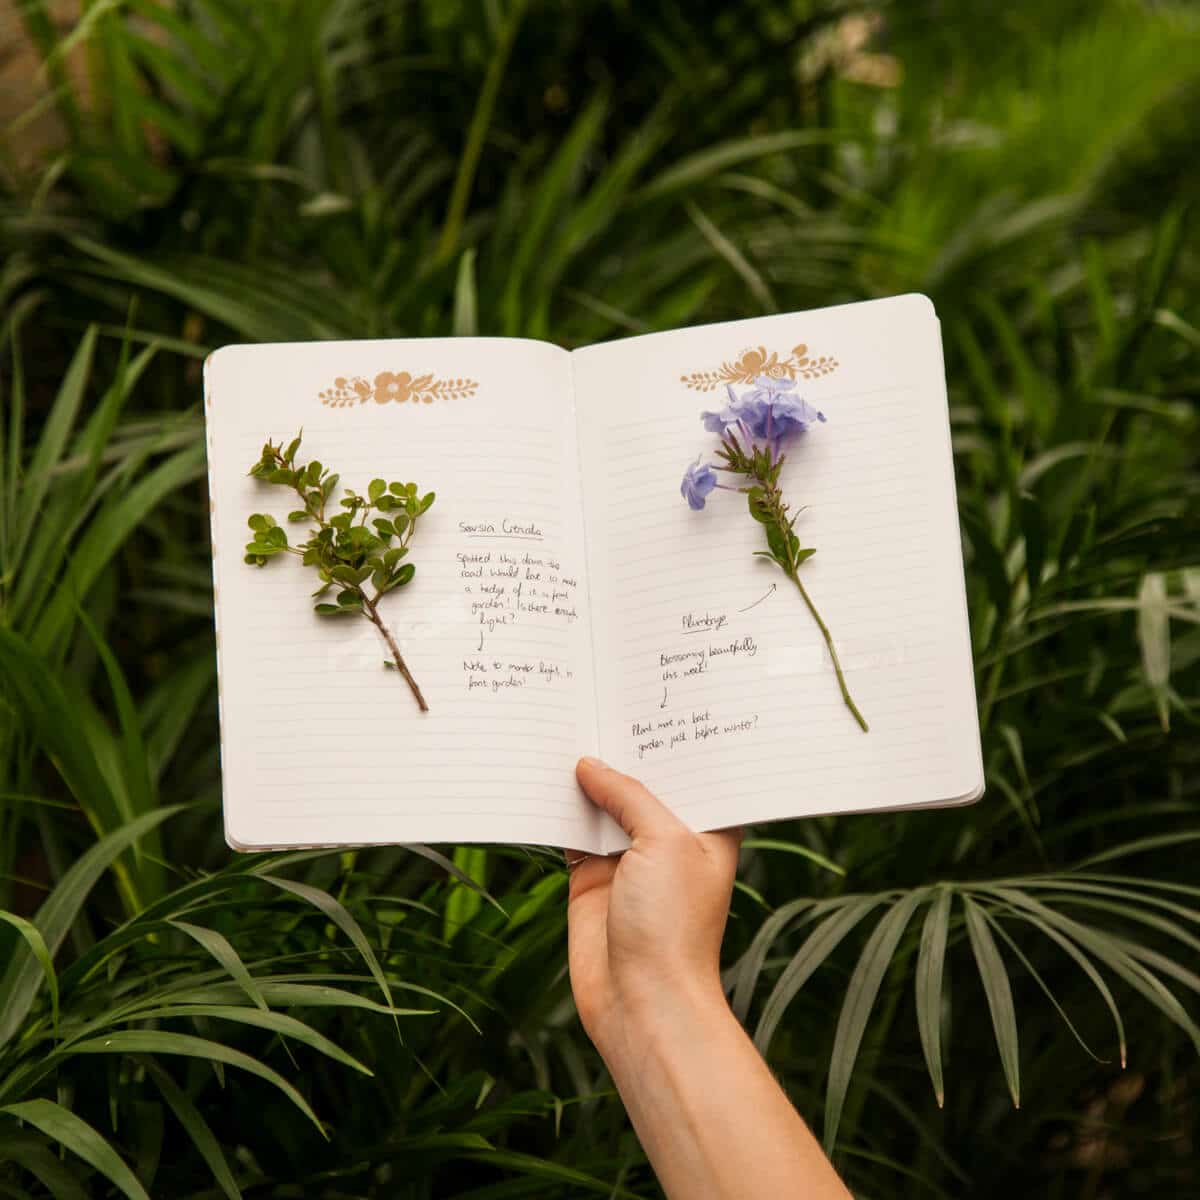 Hands holding an open journal with pressed flowers and handwritten notes amidst lush green foliage.